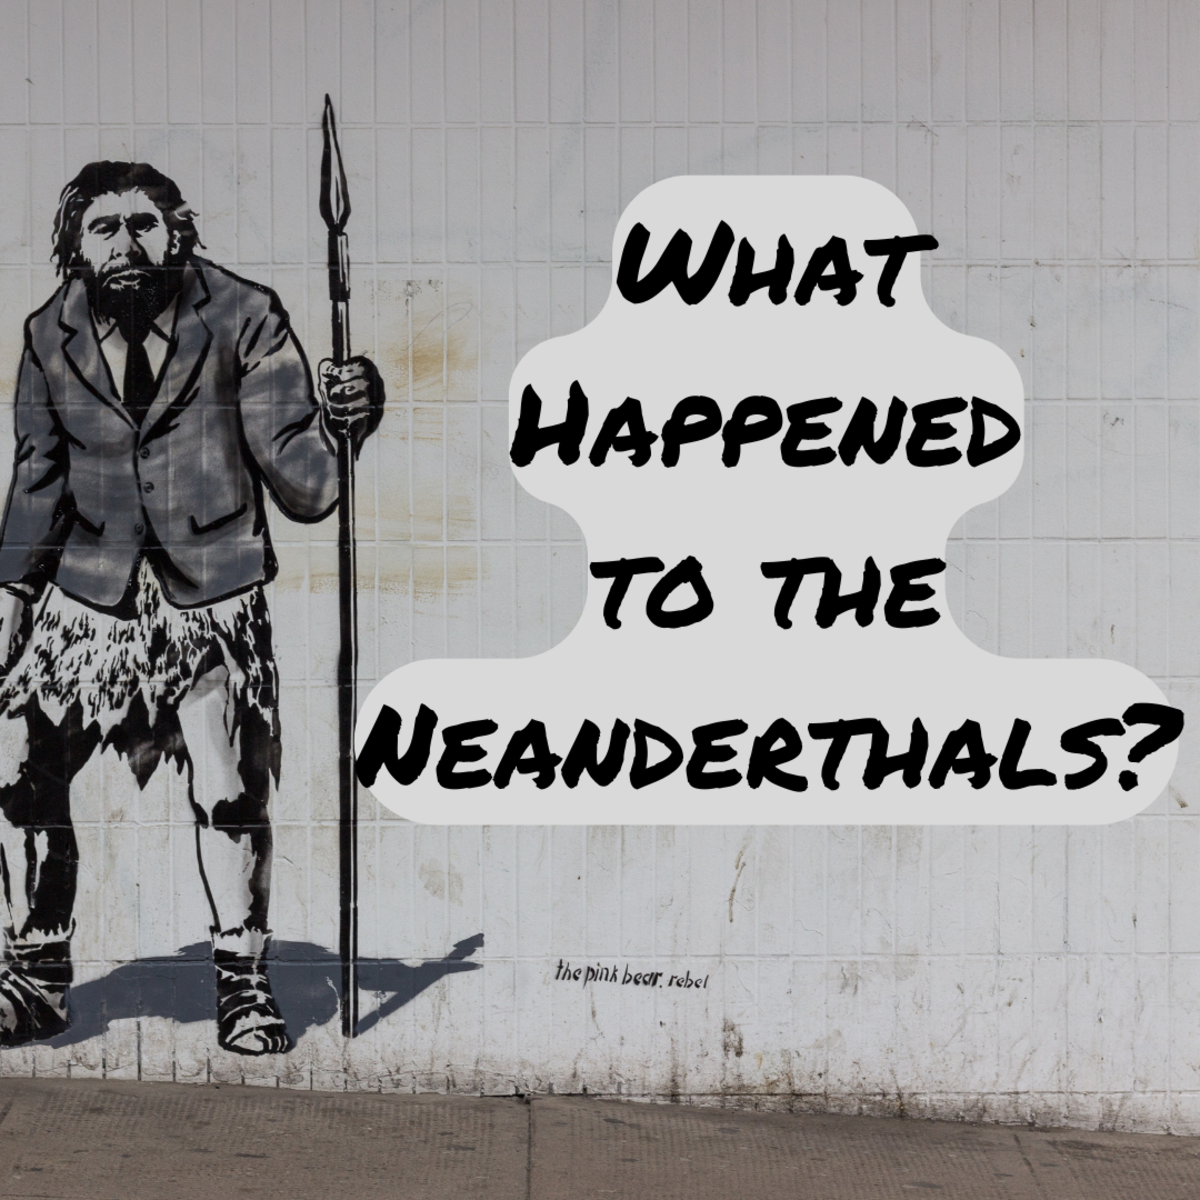 What Happened to the Neanderthals?